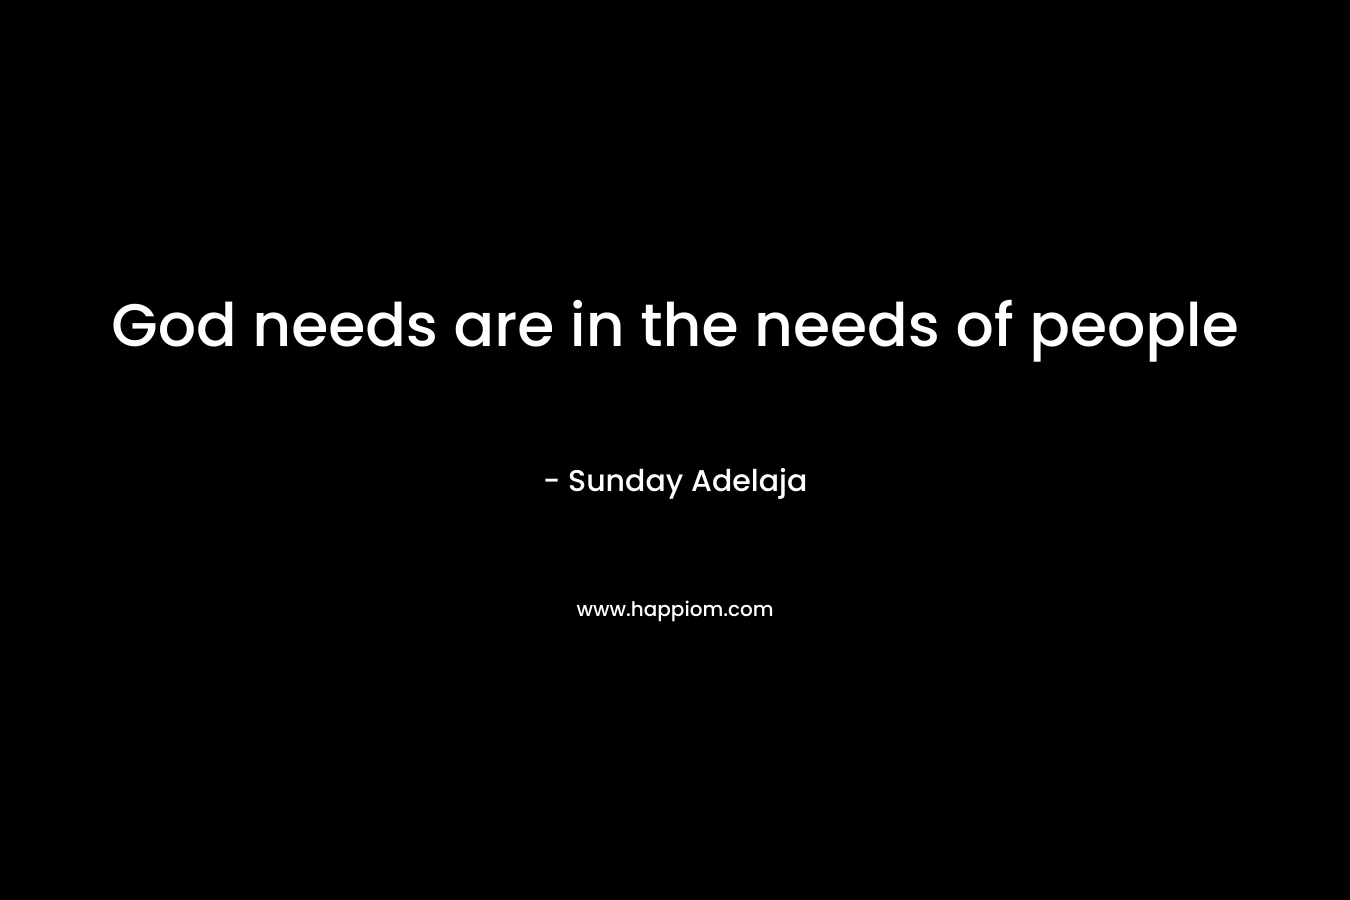 God needs are in the needs of people